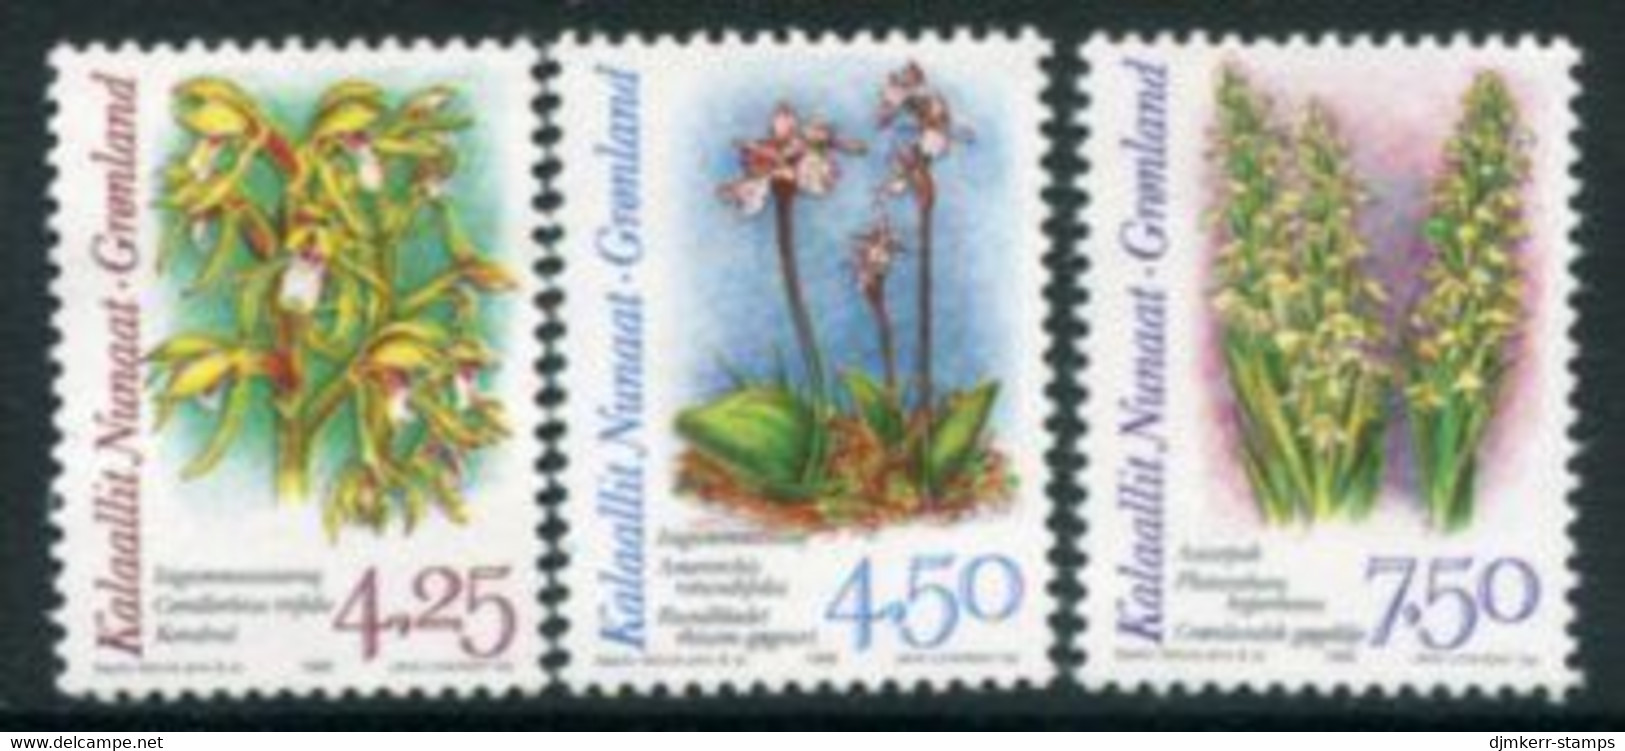 GREENLAND 1996 Arctic Orchids II Ordinary Paper MNH / ** Michel 284x-86x - Unused Stamps